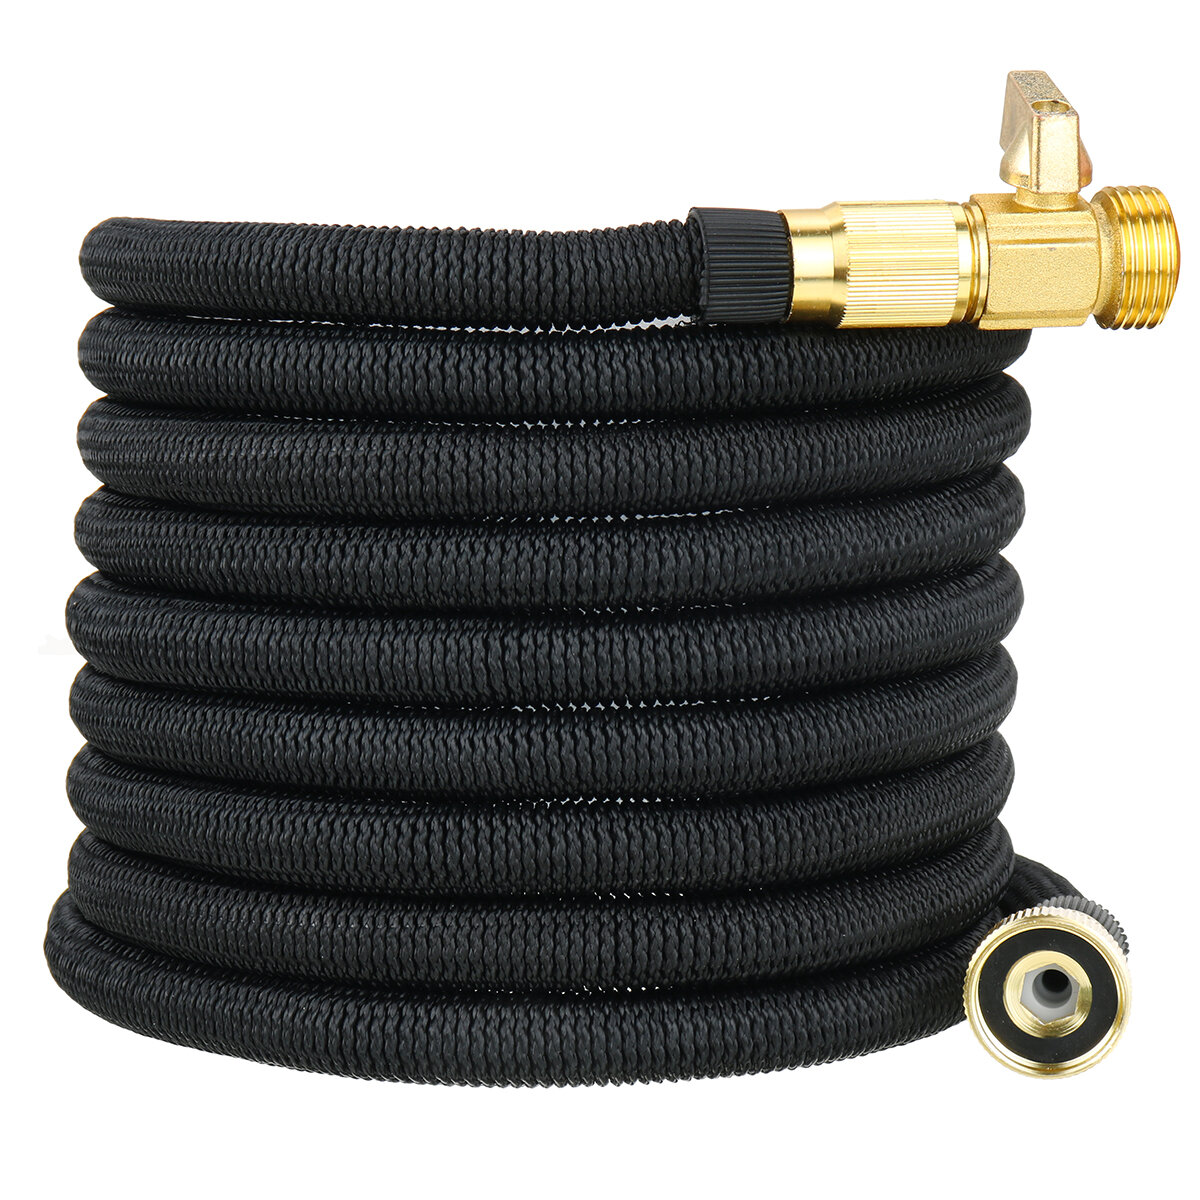 

25FT Expandable Garden Water Hose Flexible Latex Tube US Pipe Watering Black